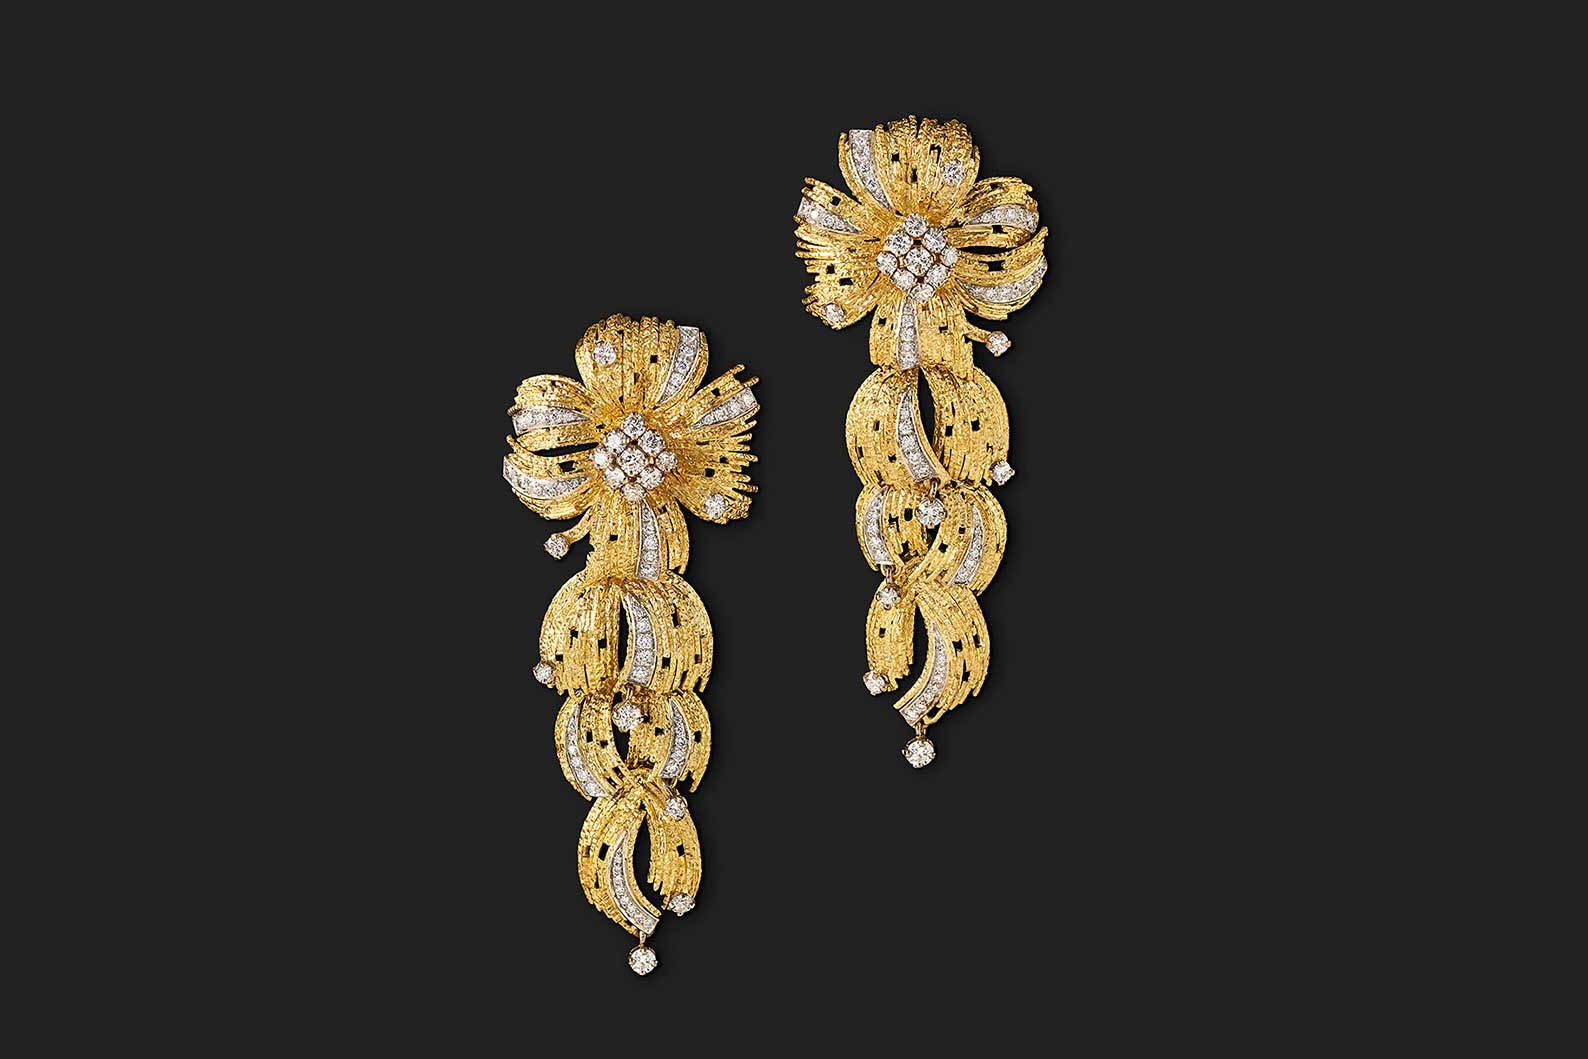 Grima en tremblant brooch with diamonds and 18k yellow gold